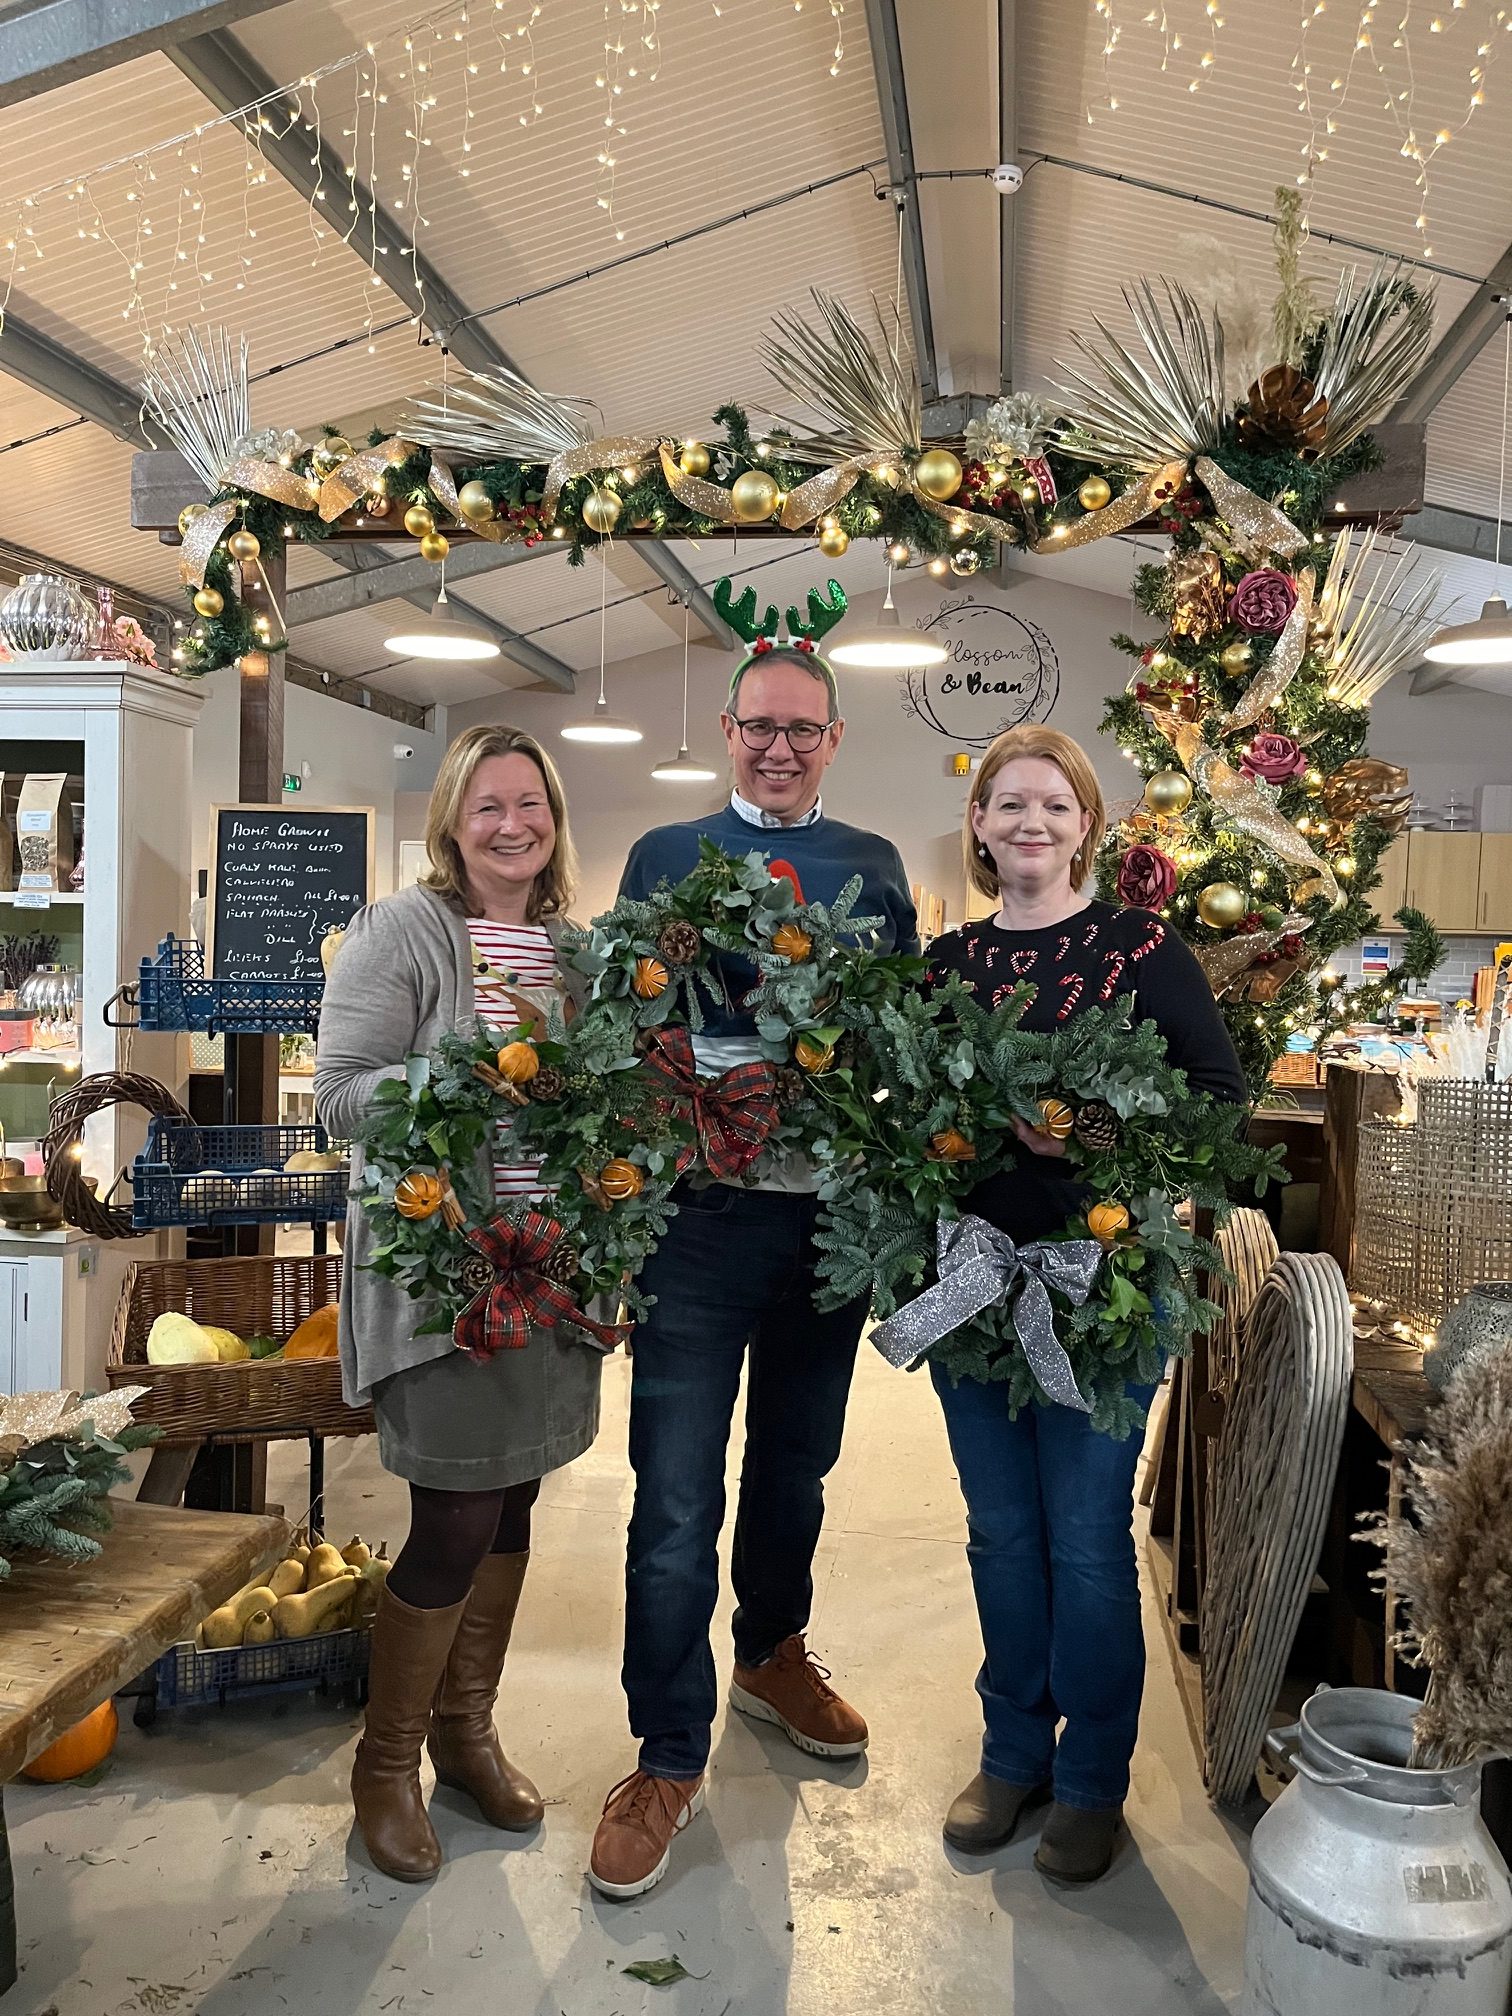 Hughes Solicitors partners holding Christmas wreaths